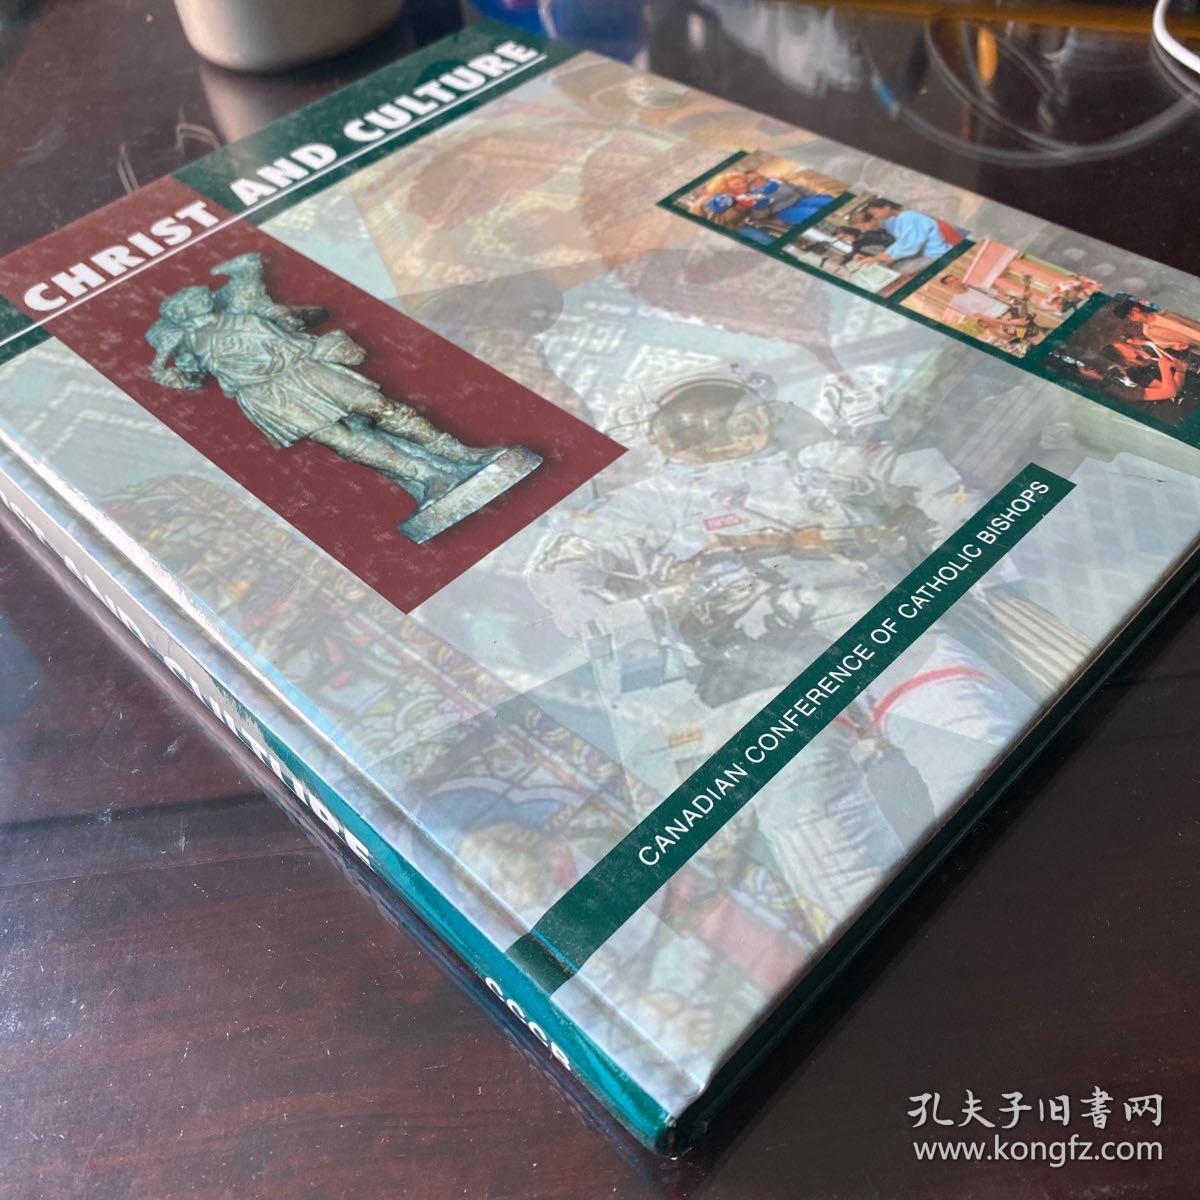 Social culture society history of cultural studies theory western philosophy 社会与文化 英文原版精装